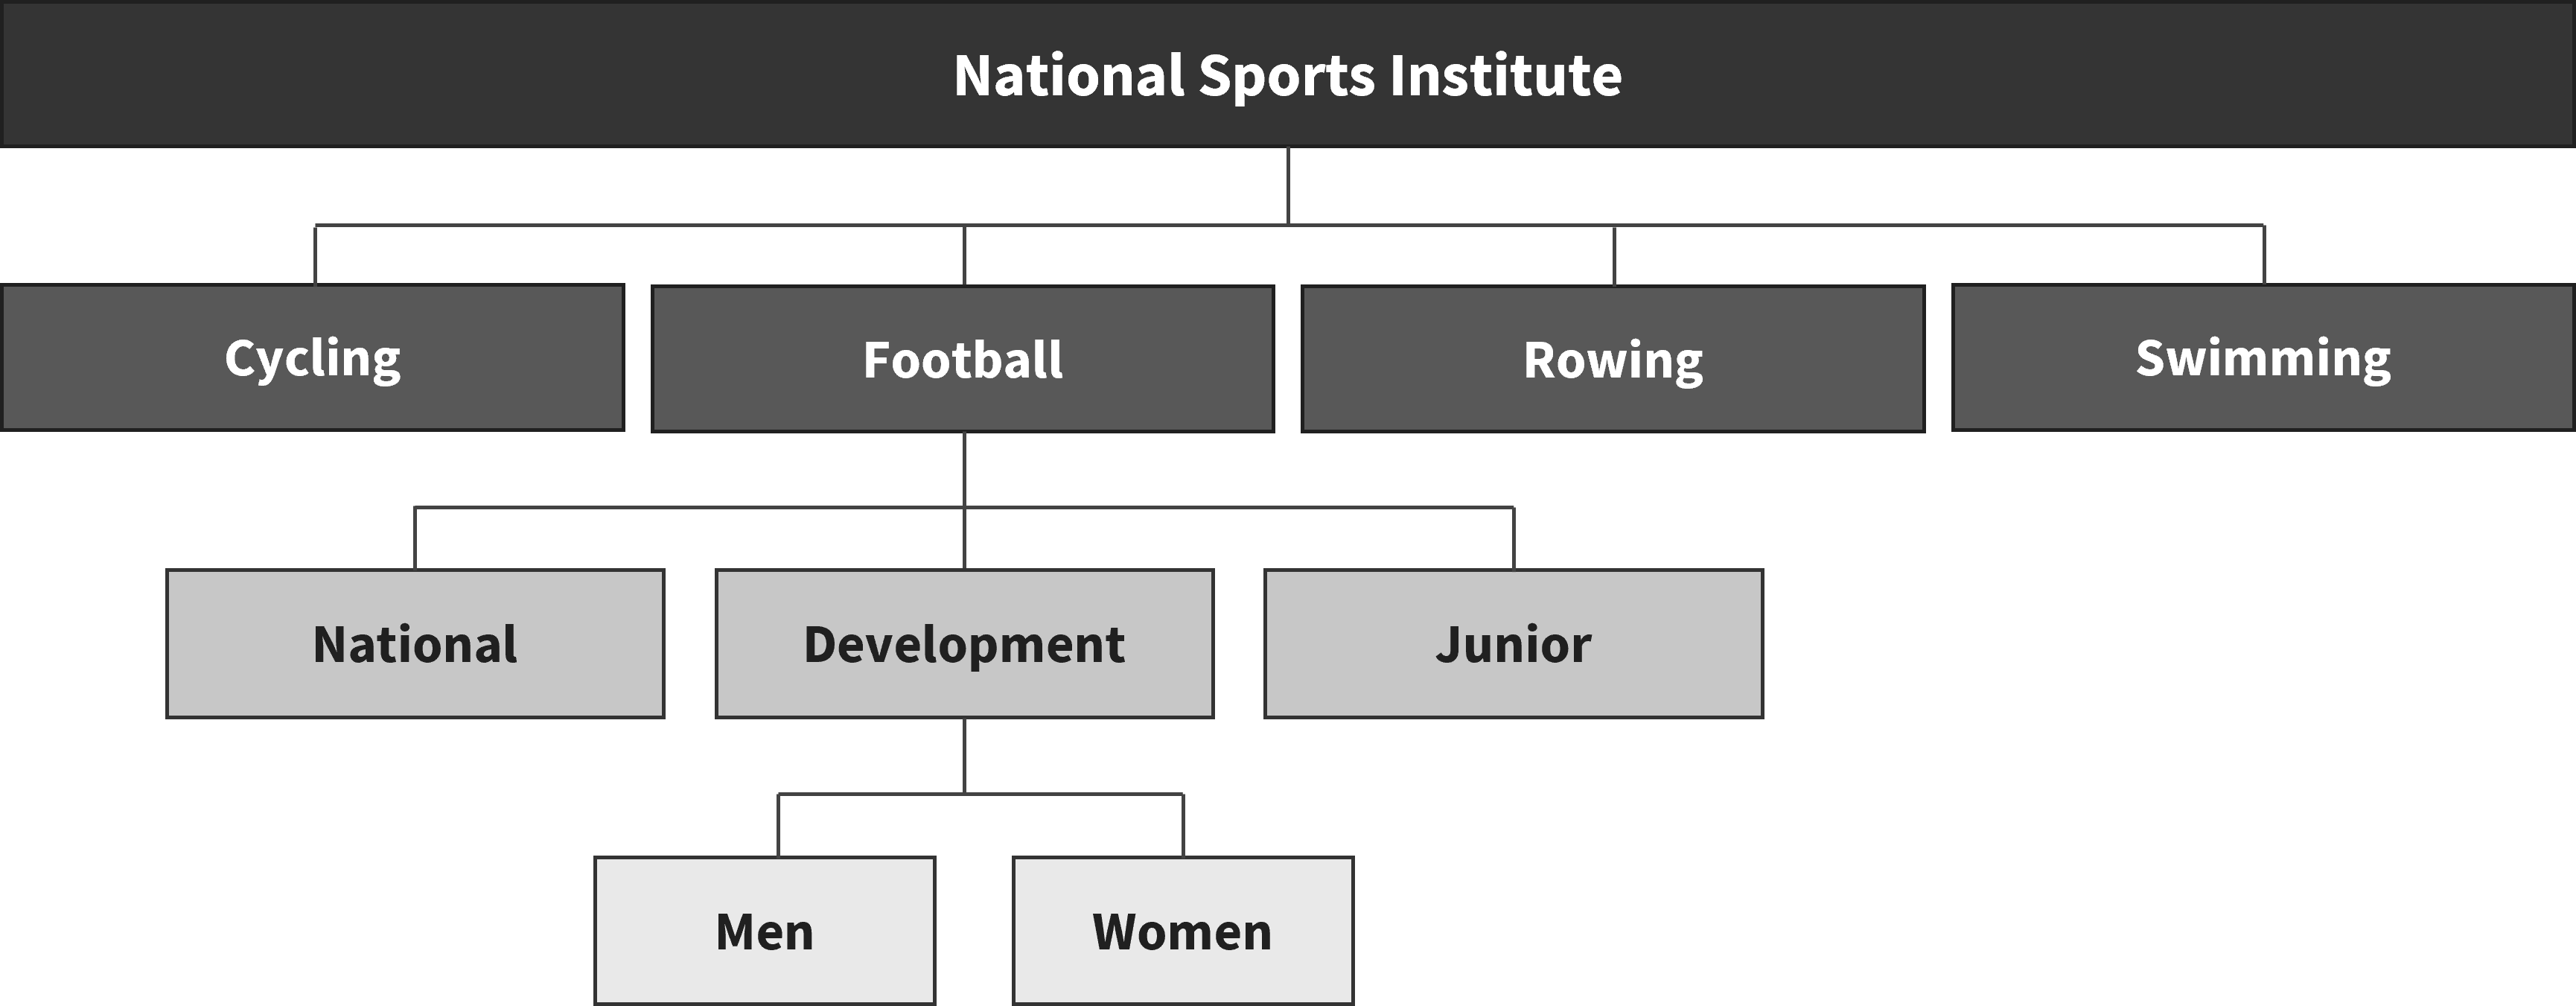 An example of a hierarchical grouping structure. The organization may be a National Sports Institute, with parent groups for different sports. Each parent group consists of sub-groups for the different divisions within each sport.